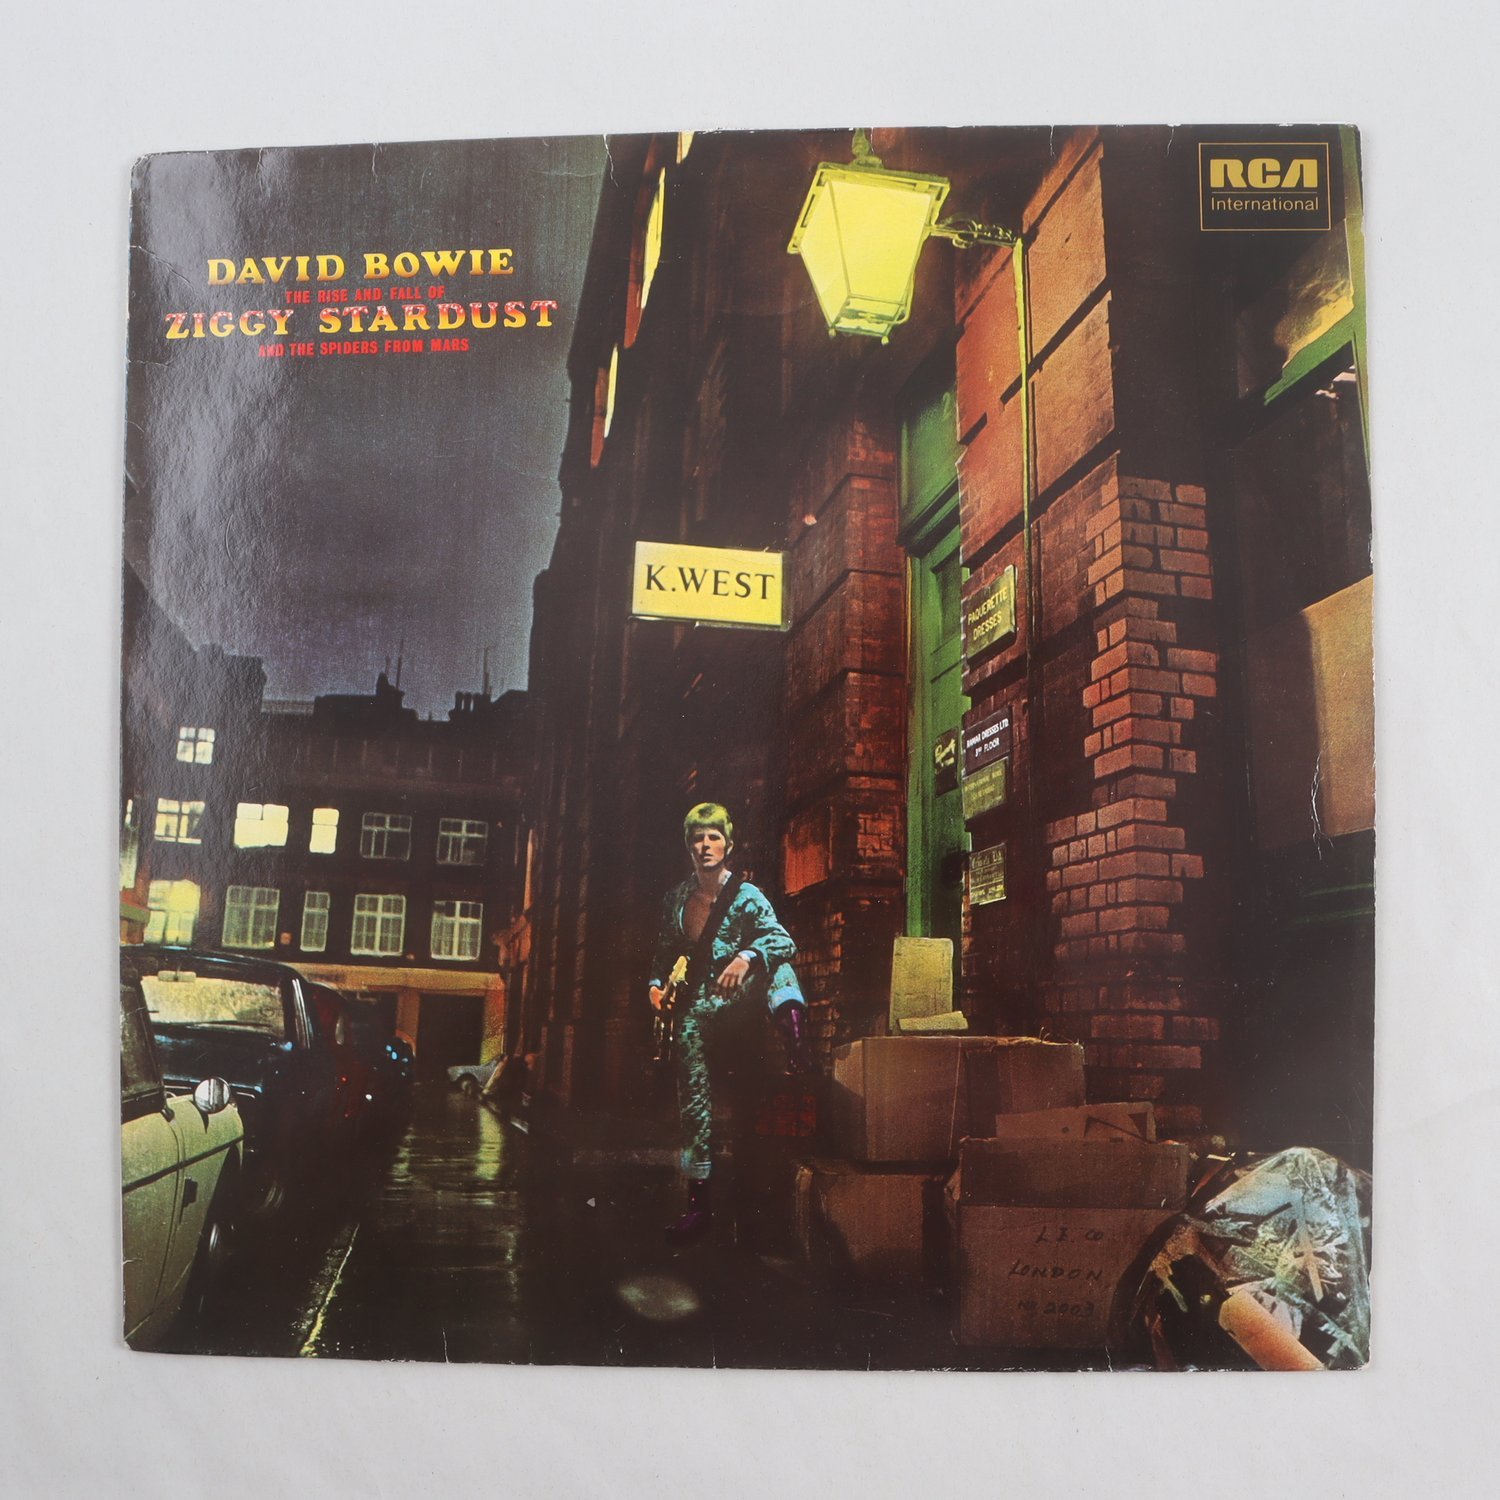 LP David Bowie, The Rise And Fall Of Ziggy Stardust And The Spiders From Mars